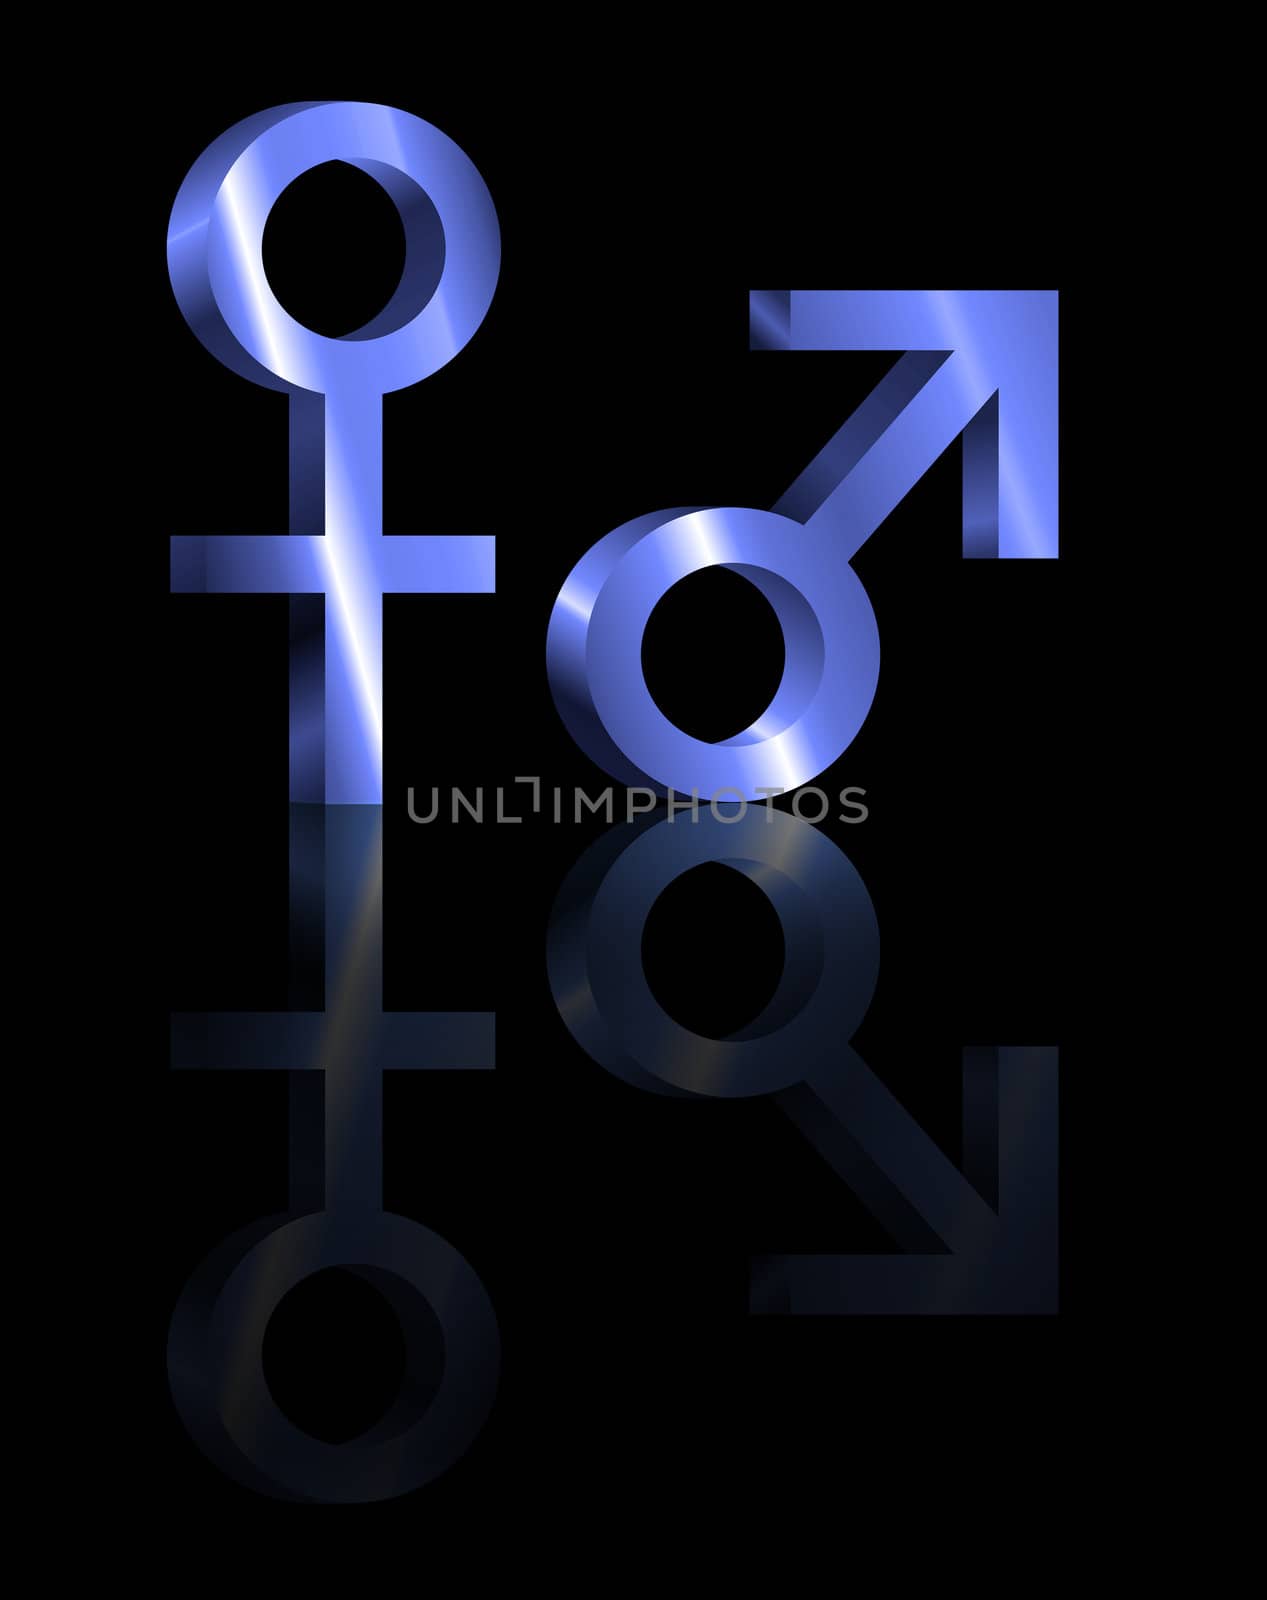 Illustration depicting metallic blue male and female symbols arranged over black and reflecting into the foreground.